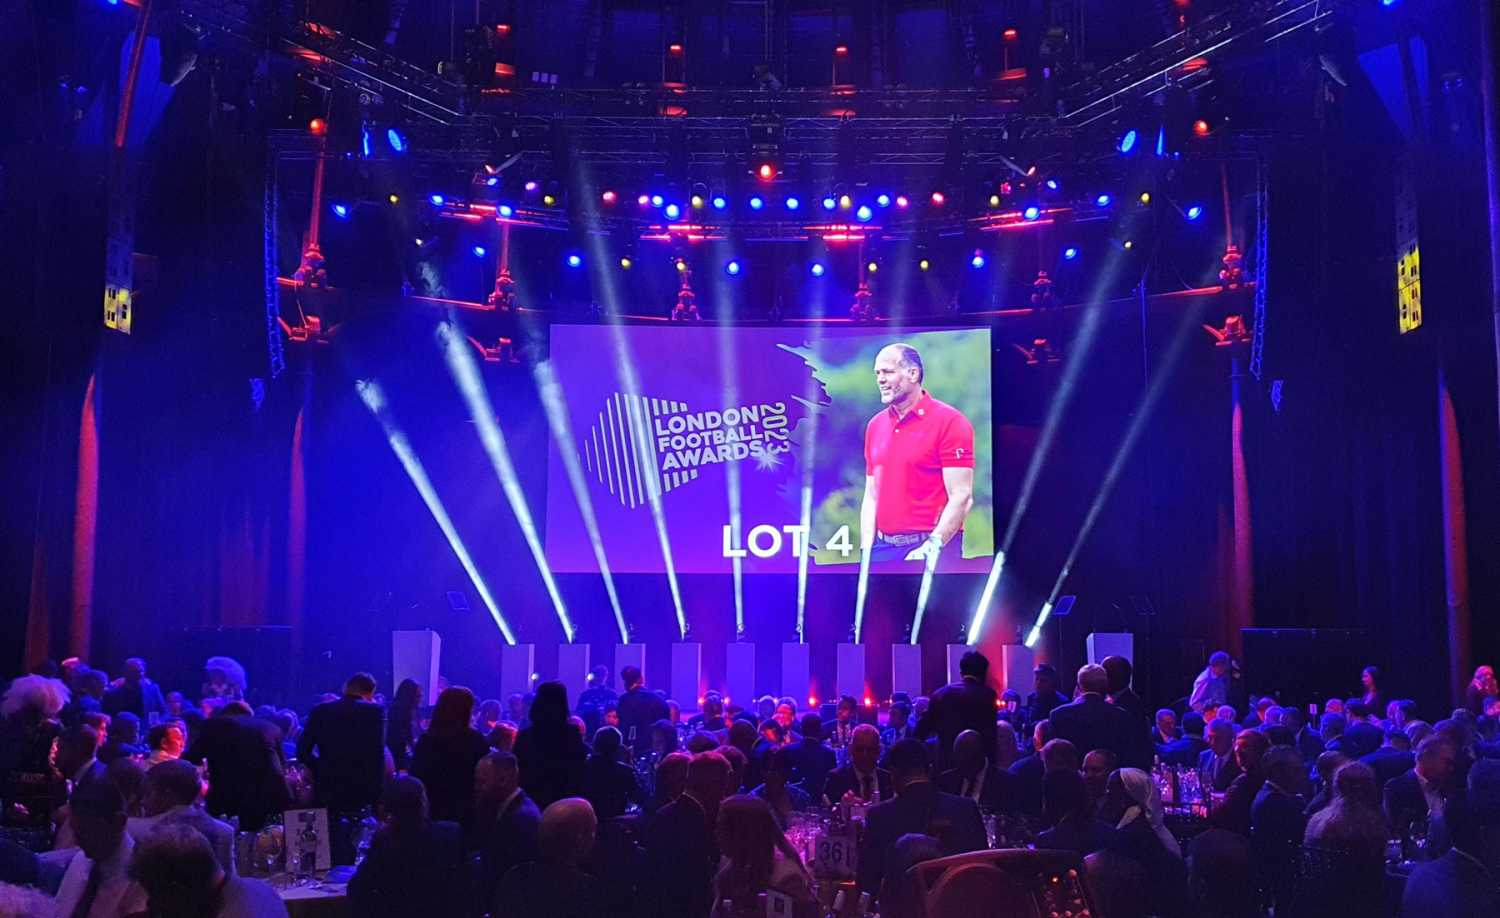 The awards event at The Roundhouse was lit by lighting designer Robert Price